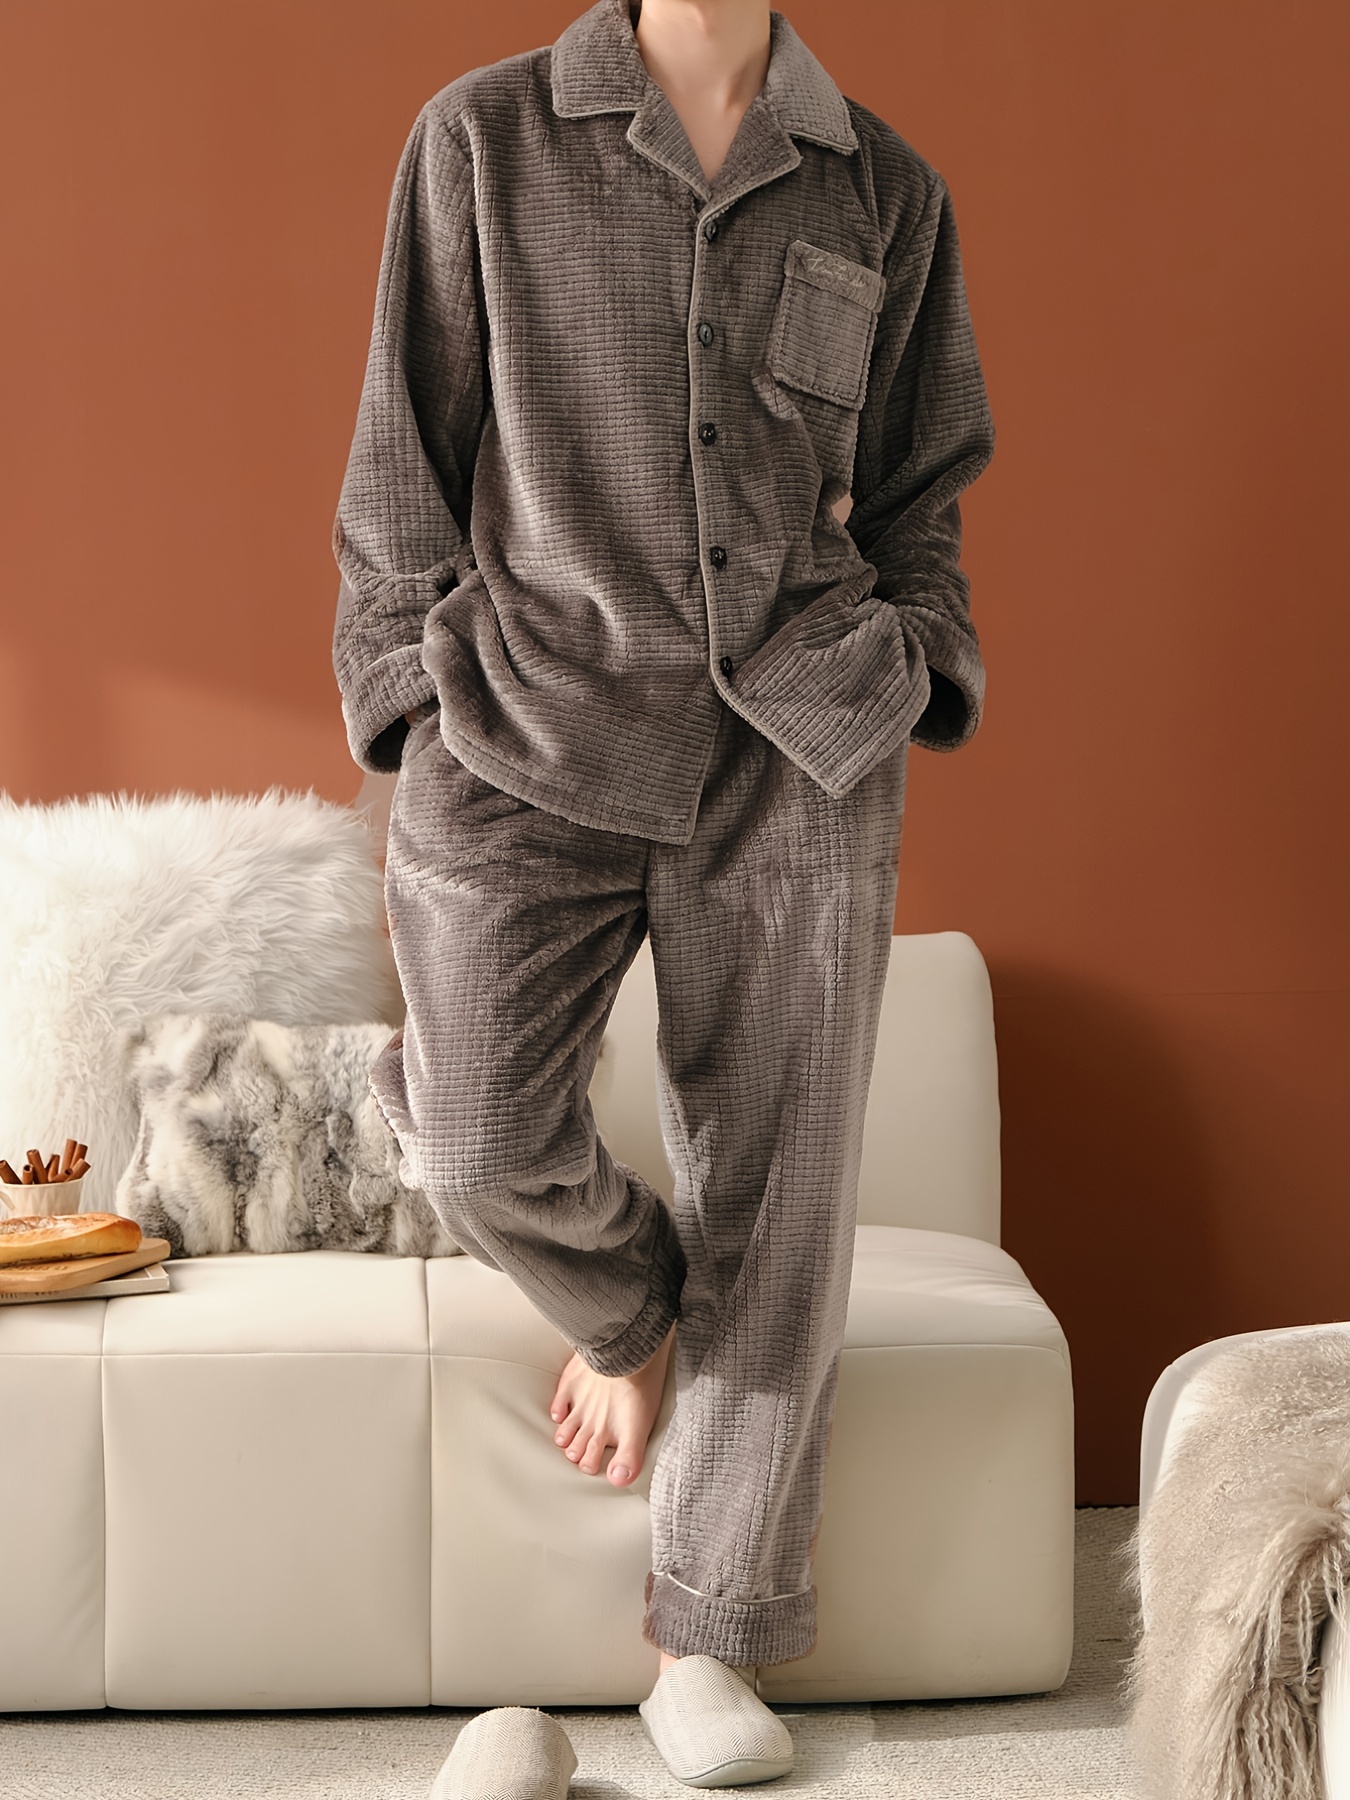 Men's Thermal Warm Thick Comfortable Pajama Sets With Pocket, Button Long  Sleeve Top & Pants, Men's Sleepwear Loungewear